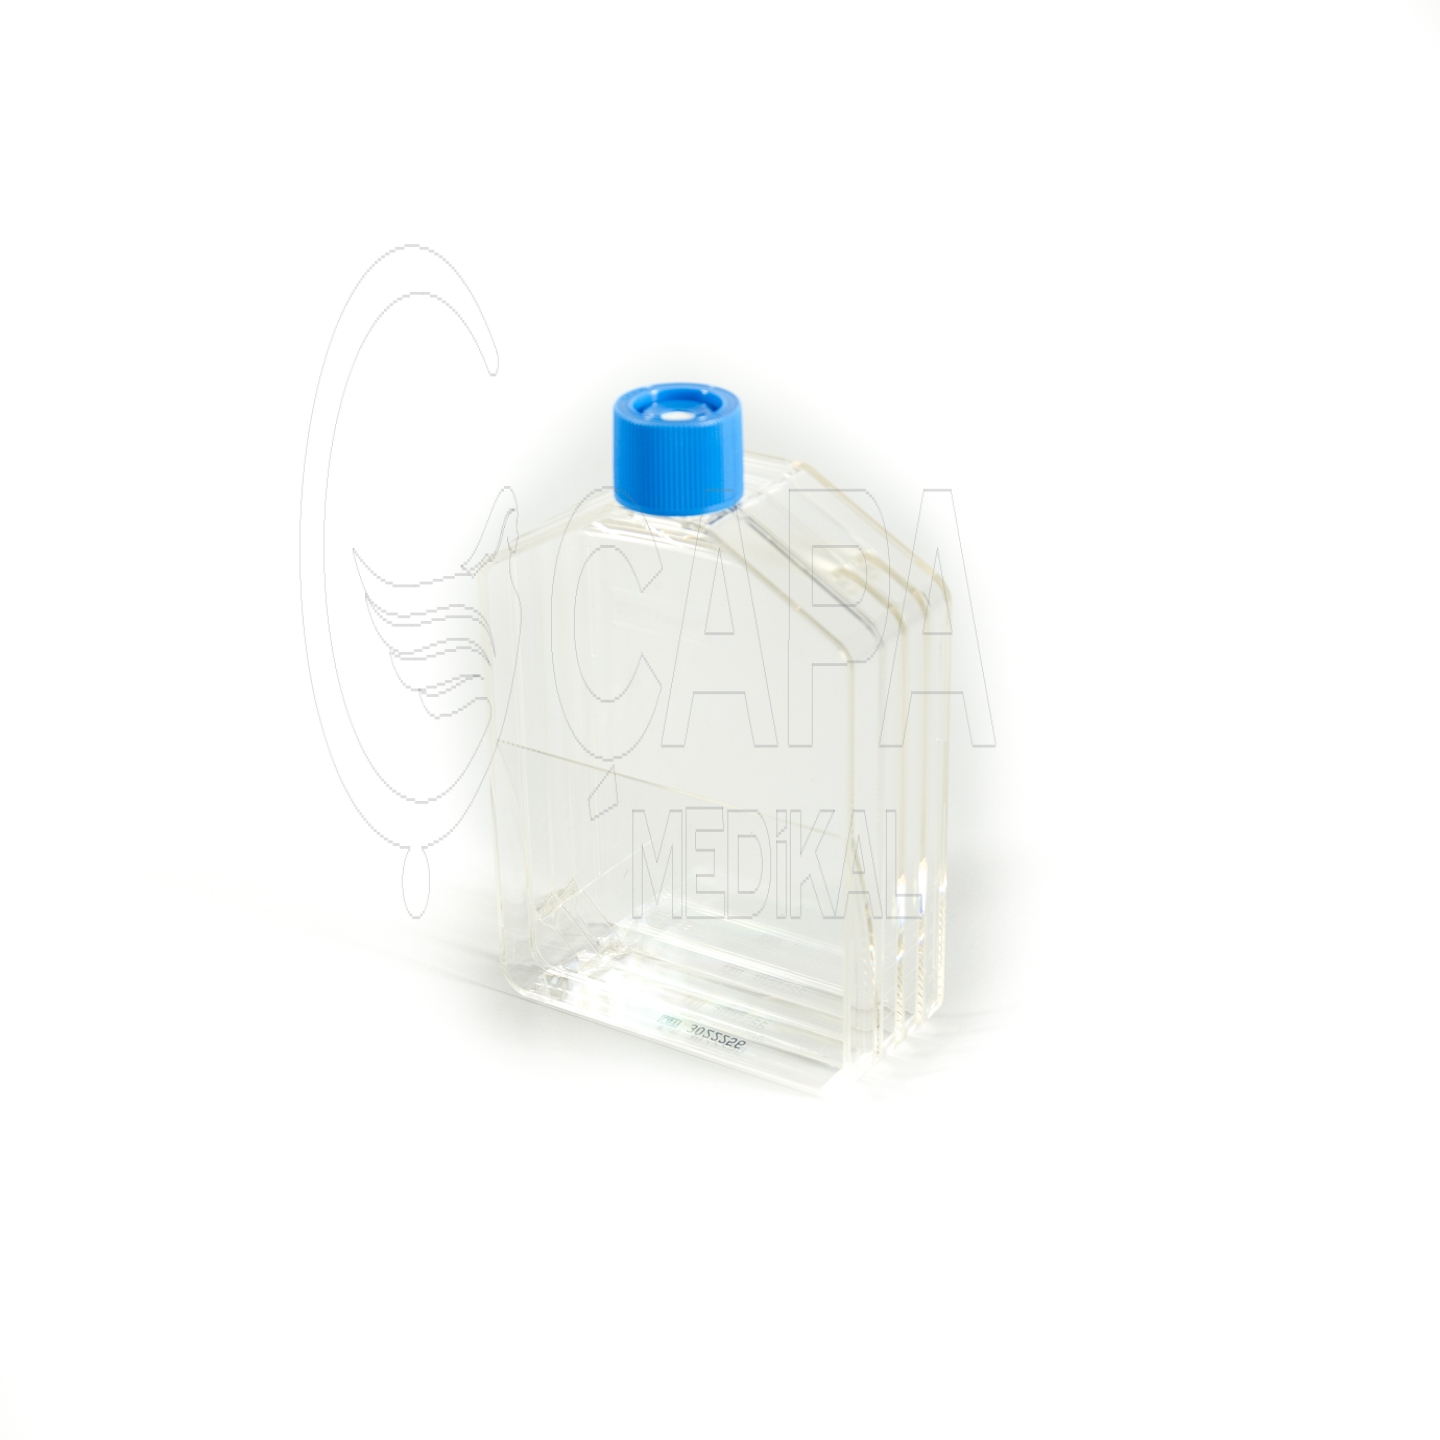 CELL CULTURE FLASK 25 CM2 (50 ML)